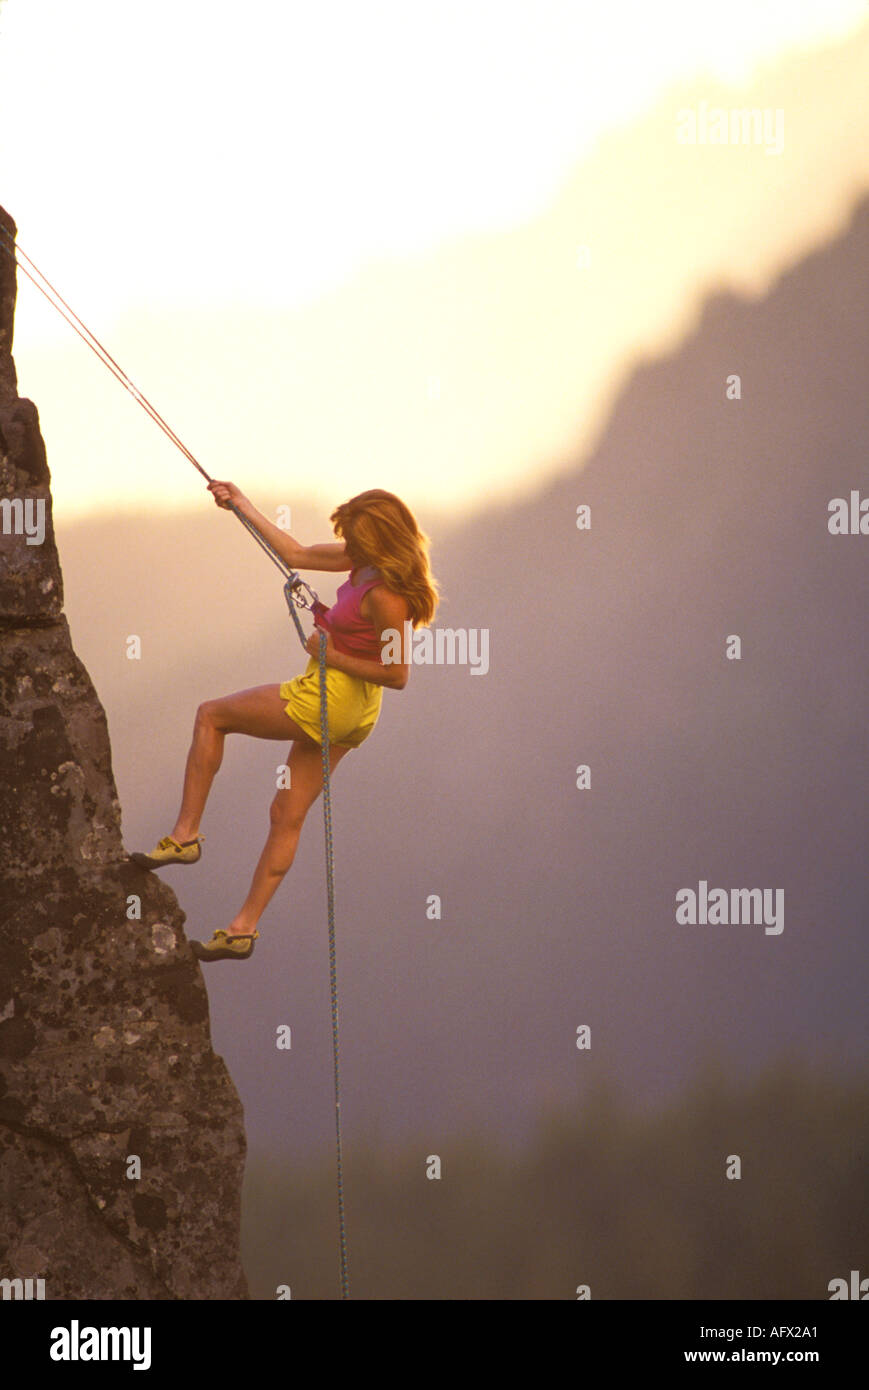 A red haired woman rock climber rappells down a rock face at sunset Stock Photo